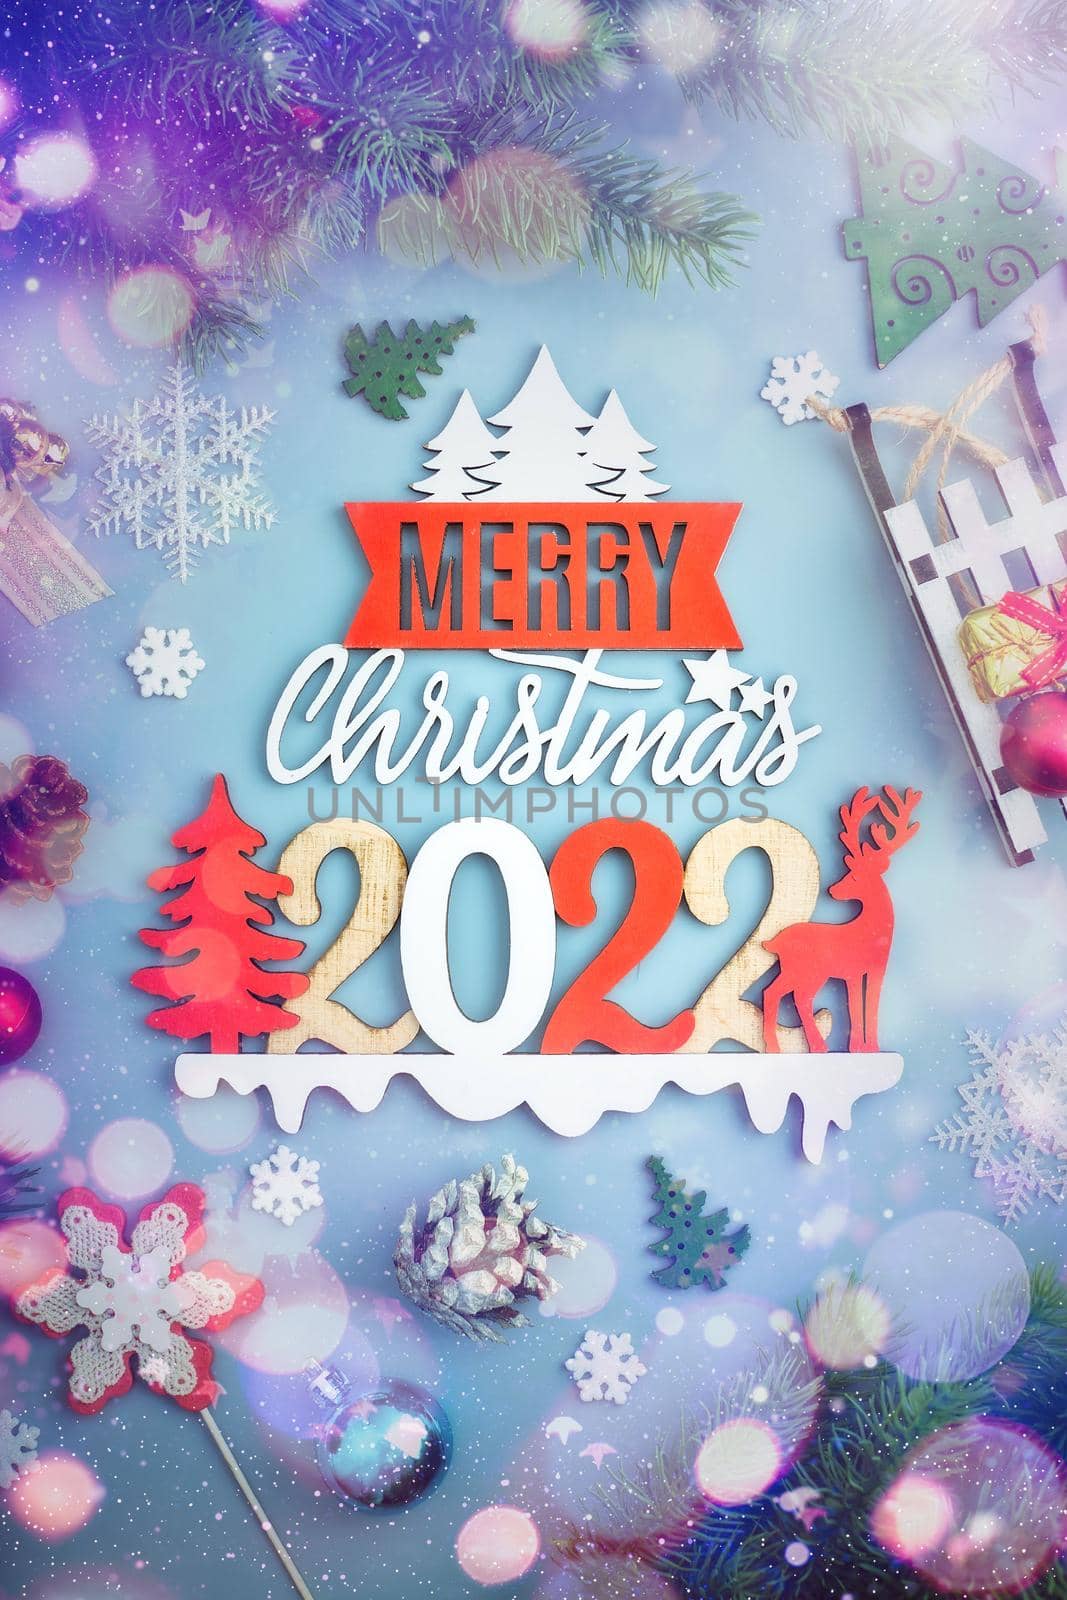 Merry christmas card. Winter holiday theme. Happy New Year. Space for text